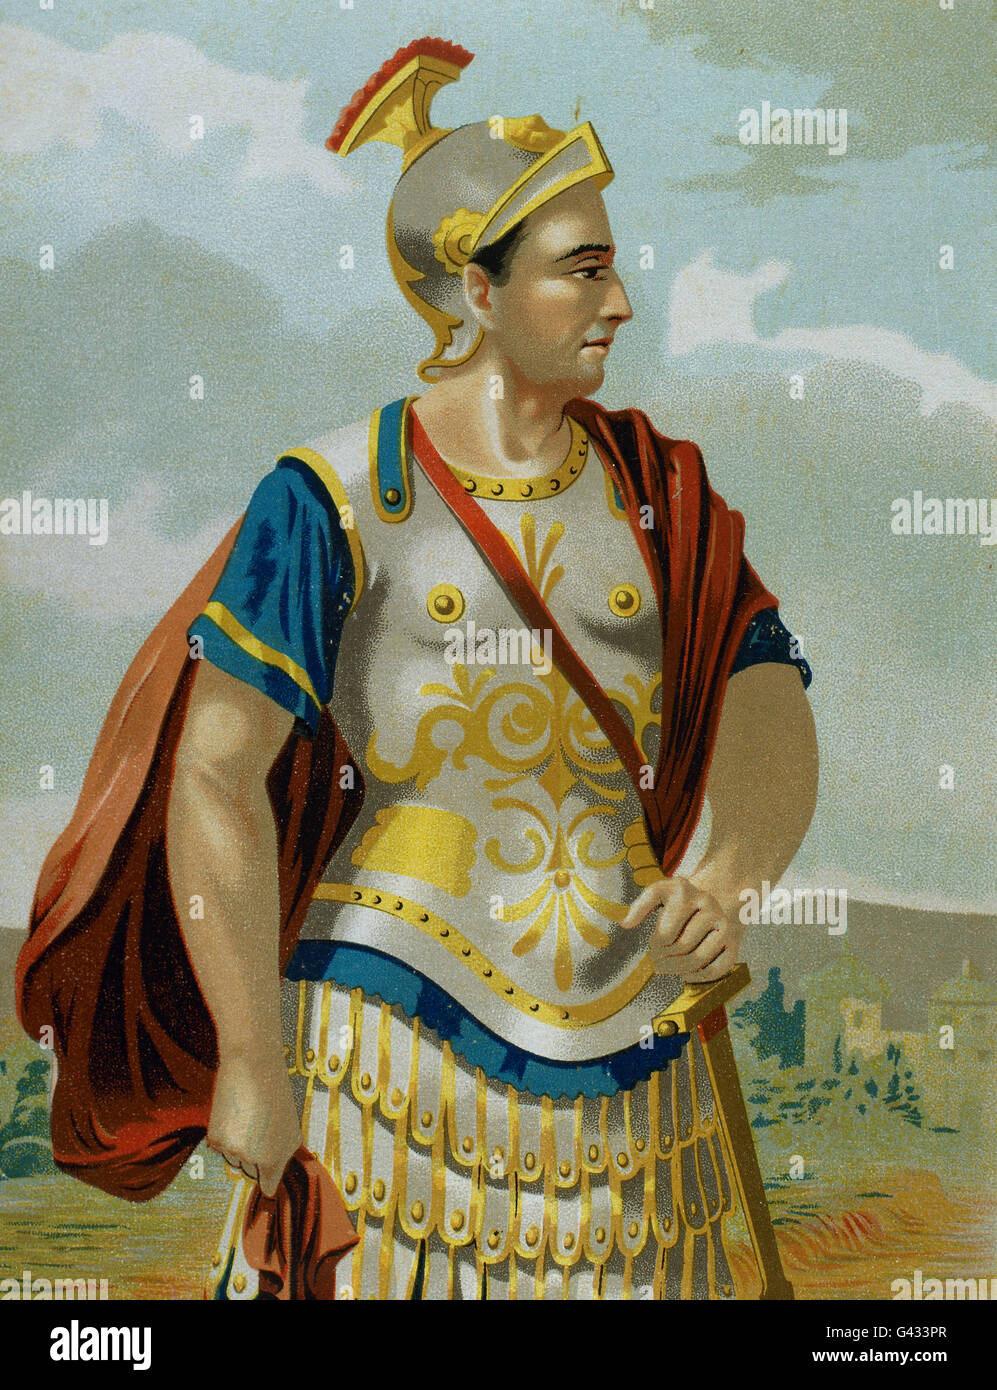 Pompey the Great (106-48 B.C.). Military political leader of the late Roman Republic. Portrait in 'Personajes Ilustres', 1875. Color. Stock Photo